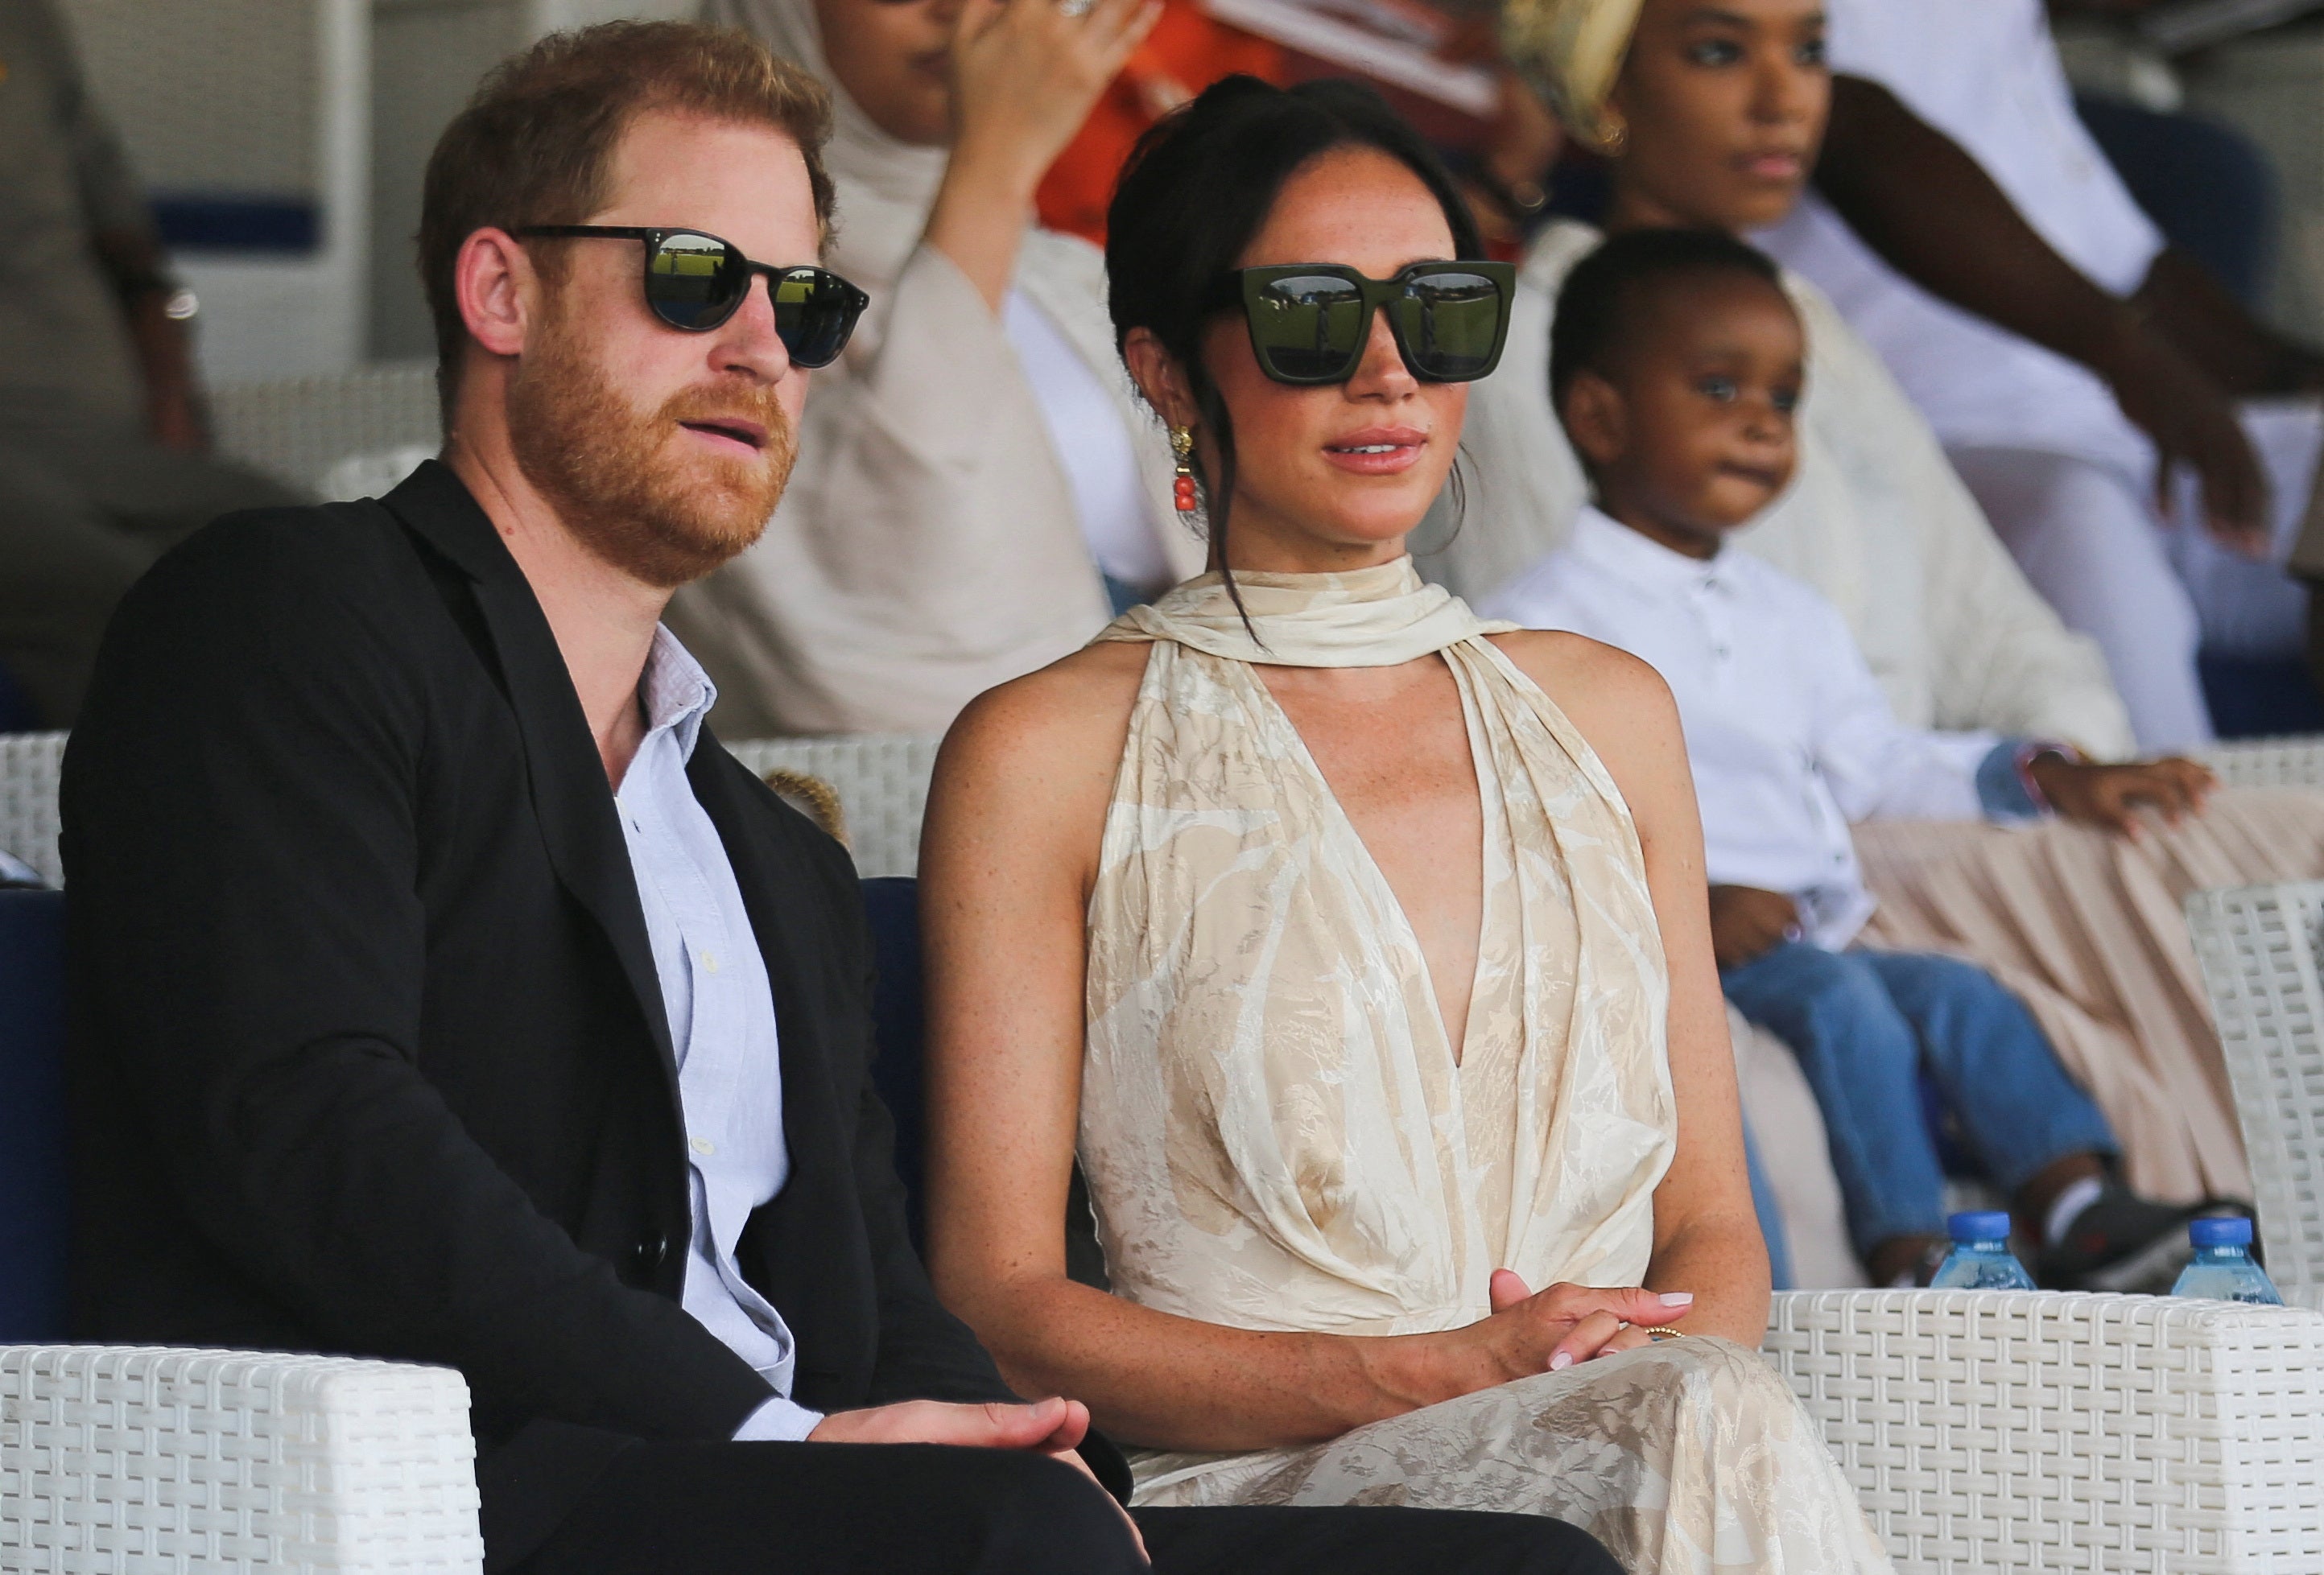 prince harry, david beckham, victoria beckham, prince harry snubbed david beckham because meghan didn’t want ‘any competition in the media’, book claims